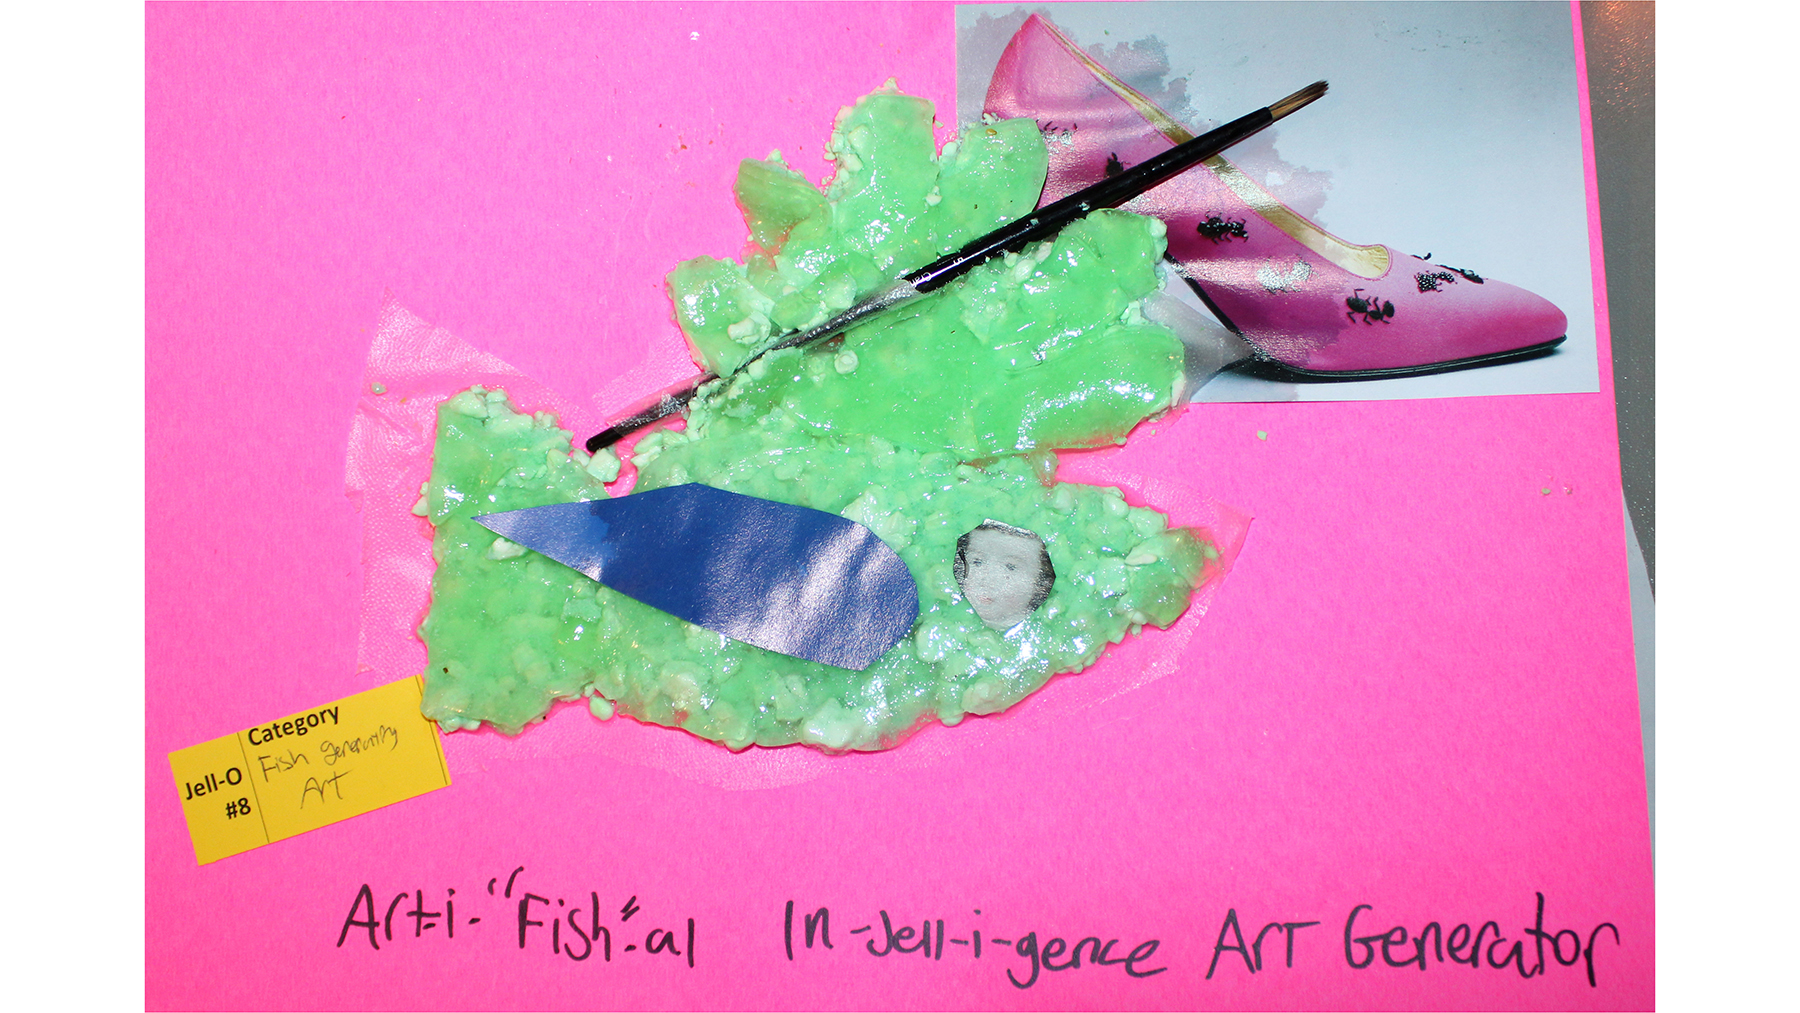 2024 Jell-O No. 8: Most Fantastic Artificial In-Jell-I-Gence Product by Emmie Welch and Lynn Welch: Arti-Fish-al In-Jell-I-Gence Art Generator